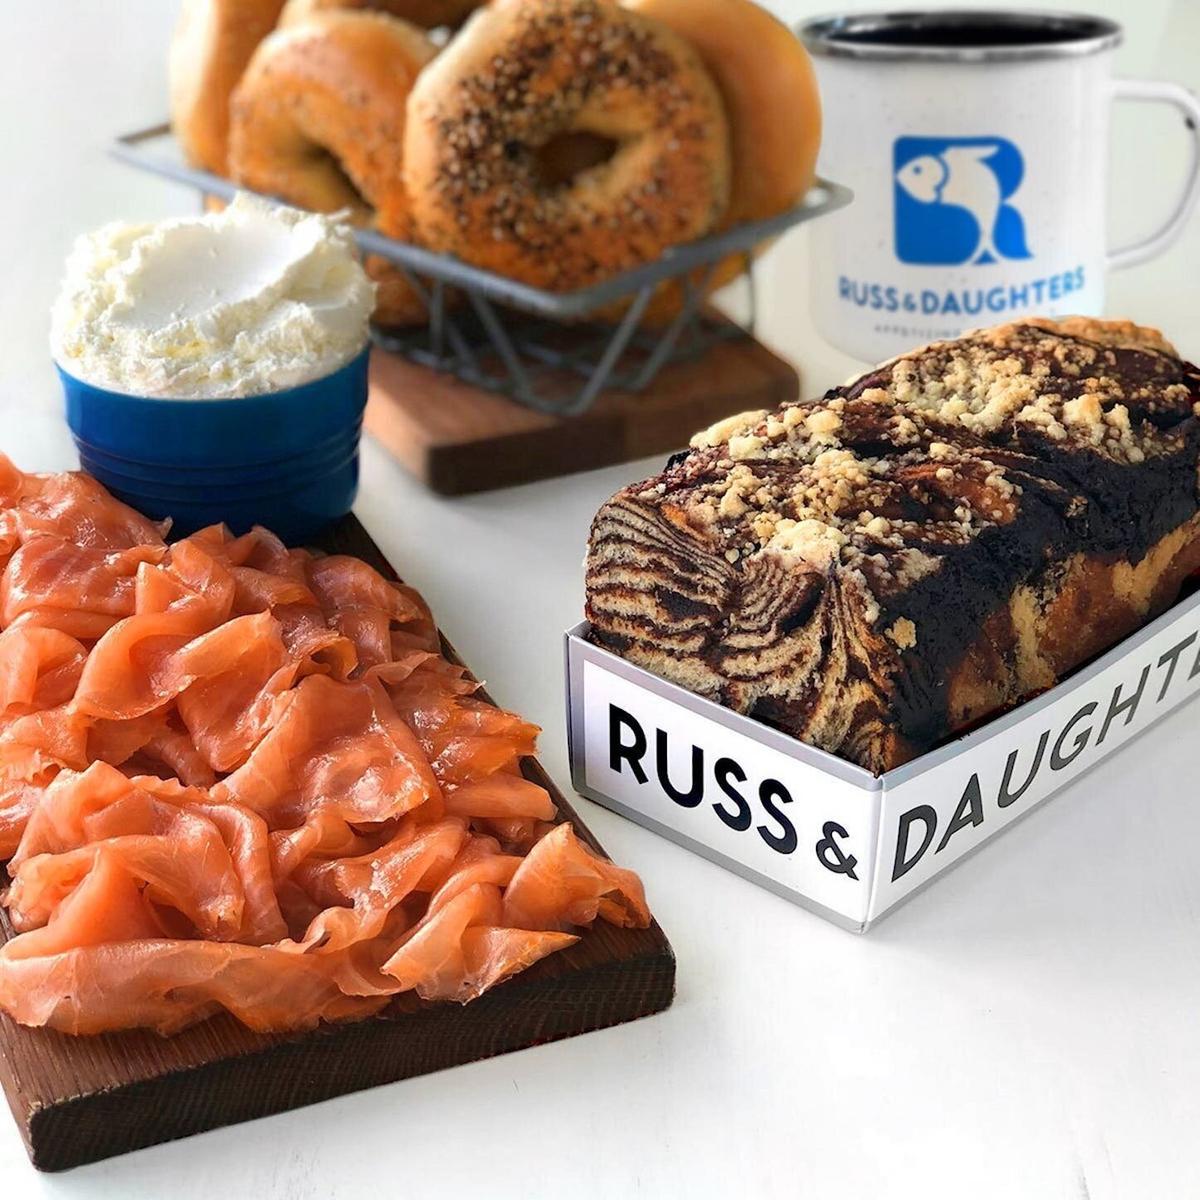 Russ & Daughters Brunch. (Courtesy of Russ & Daughters)